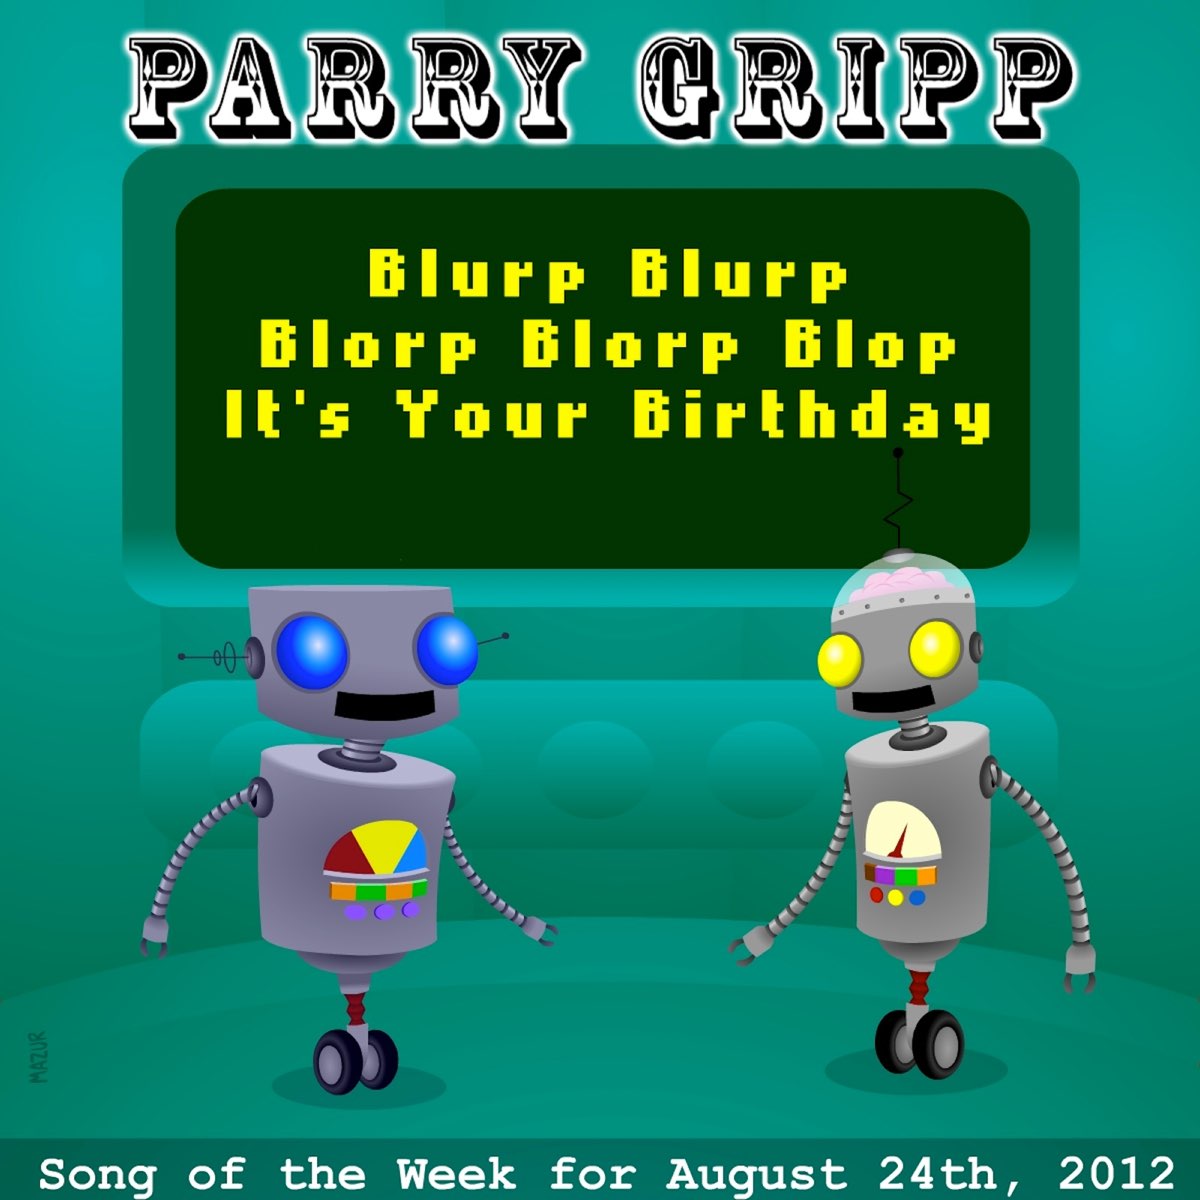 Blurp Blurp Blorp Blorp Blop It S Your Birthday Single By Parry Gripp On Apple Music - hershel the easter worm roblox id